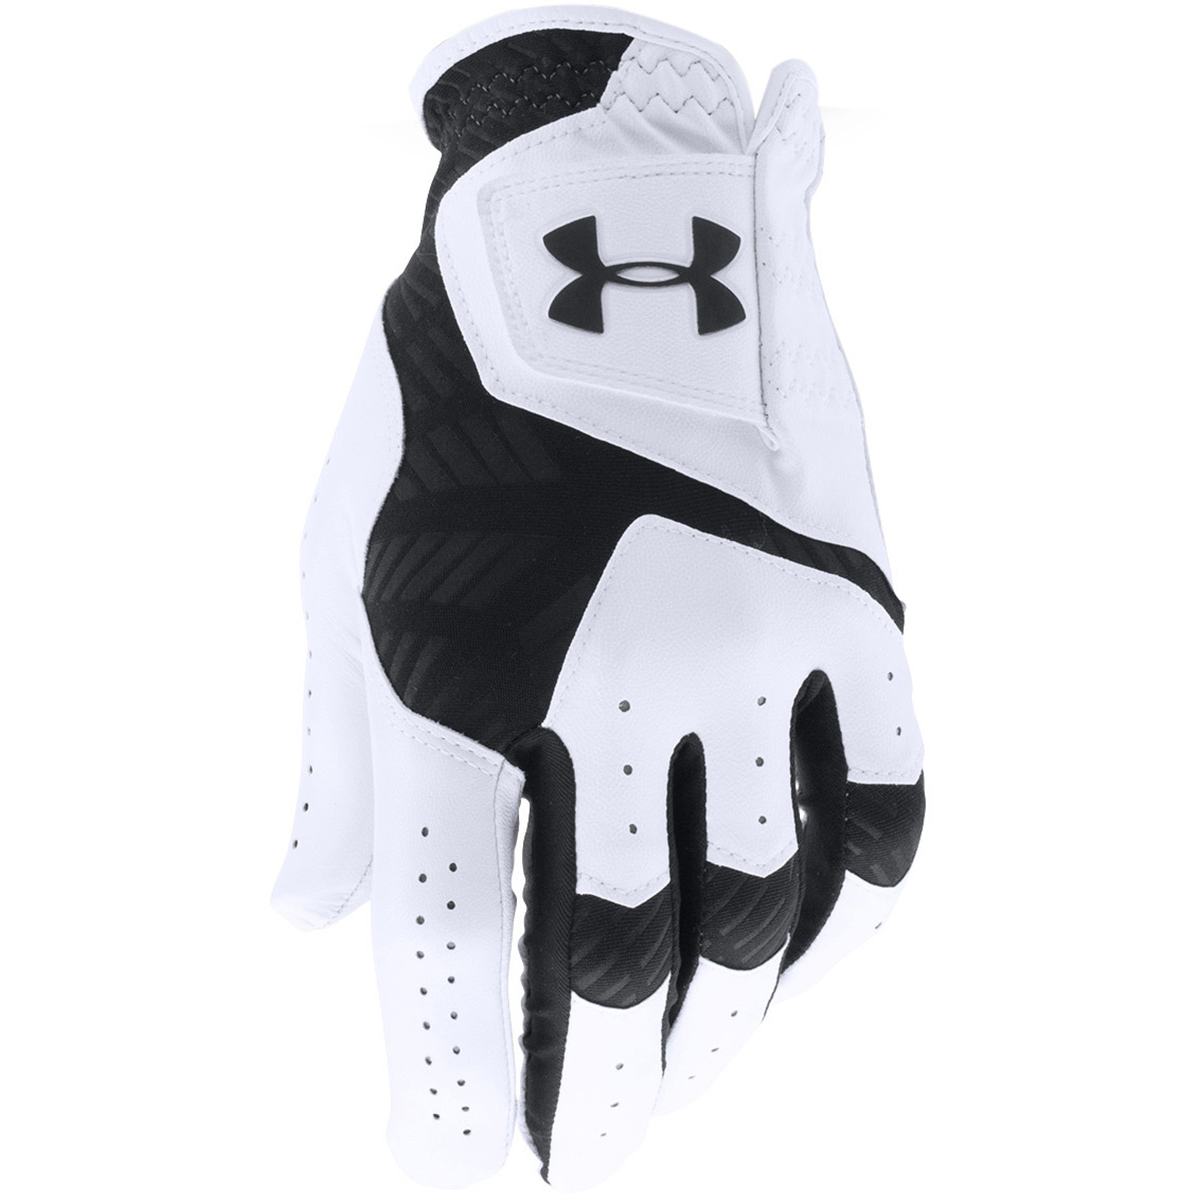 under armour cool switch glove